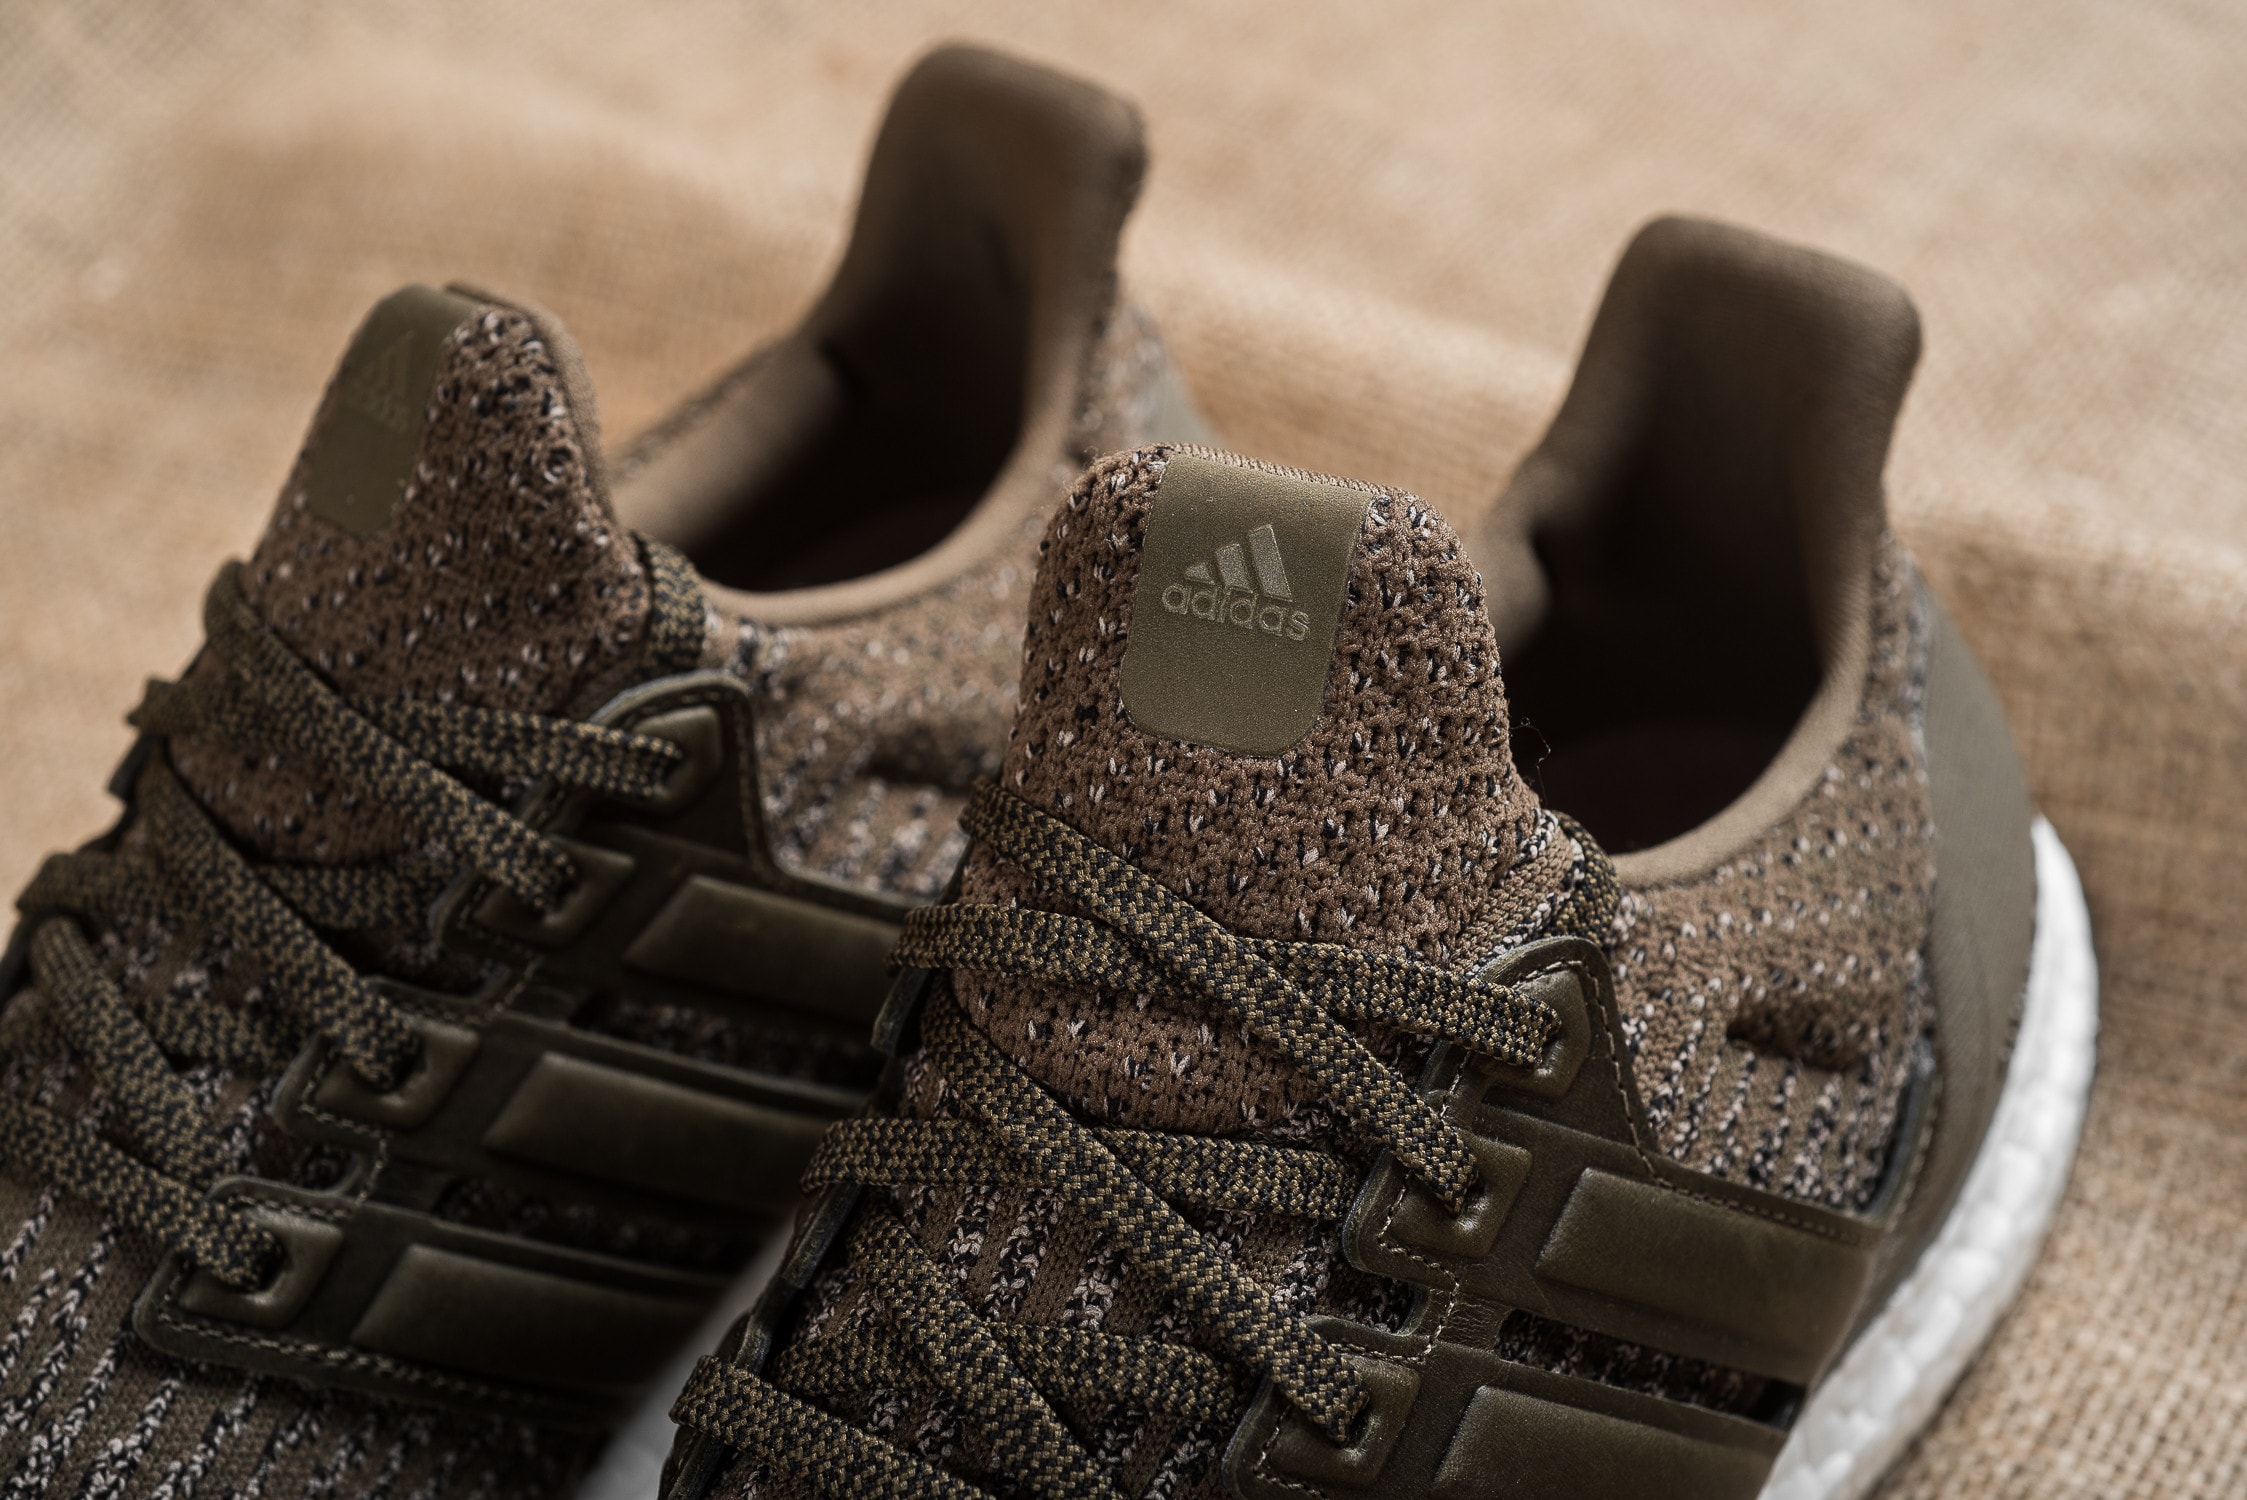 adidas UltraBOOST 3.0 “Trace Olive” Closer Look